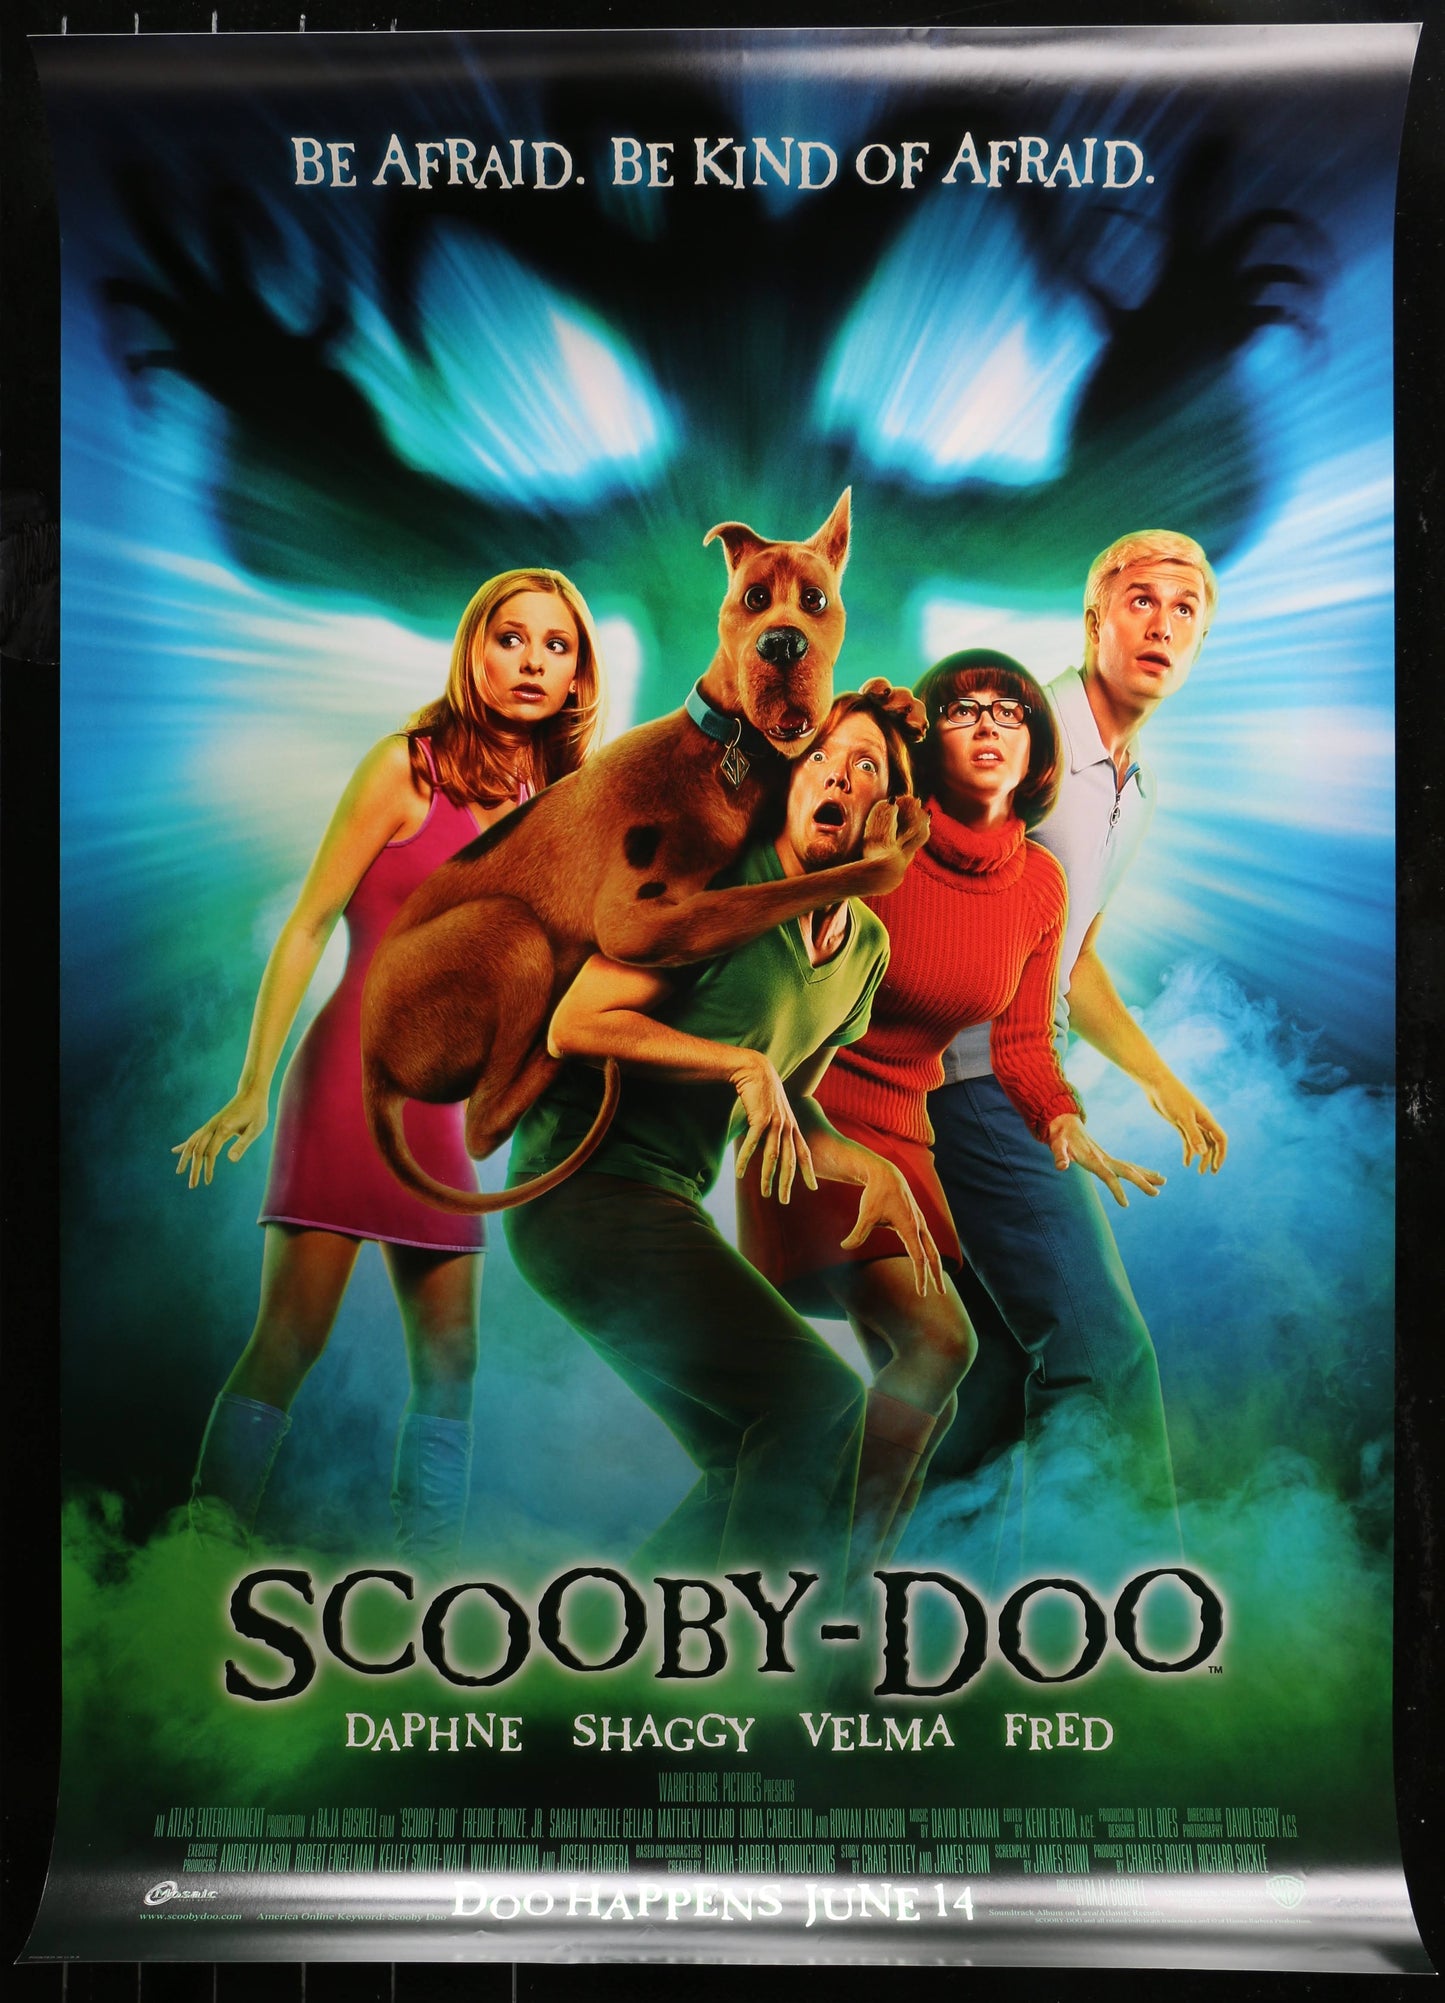 Scooby-doo US One Sheet (2002) - ORIGINAL RELEASE - posterpalace.com